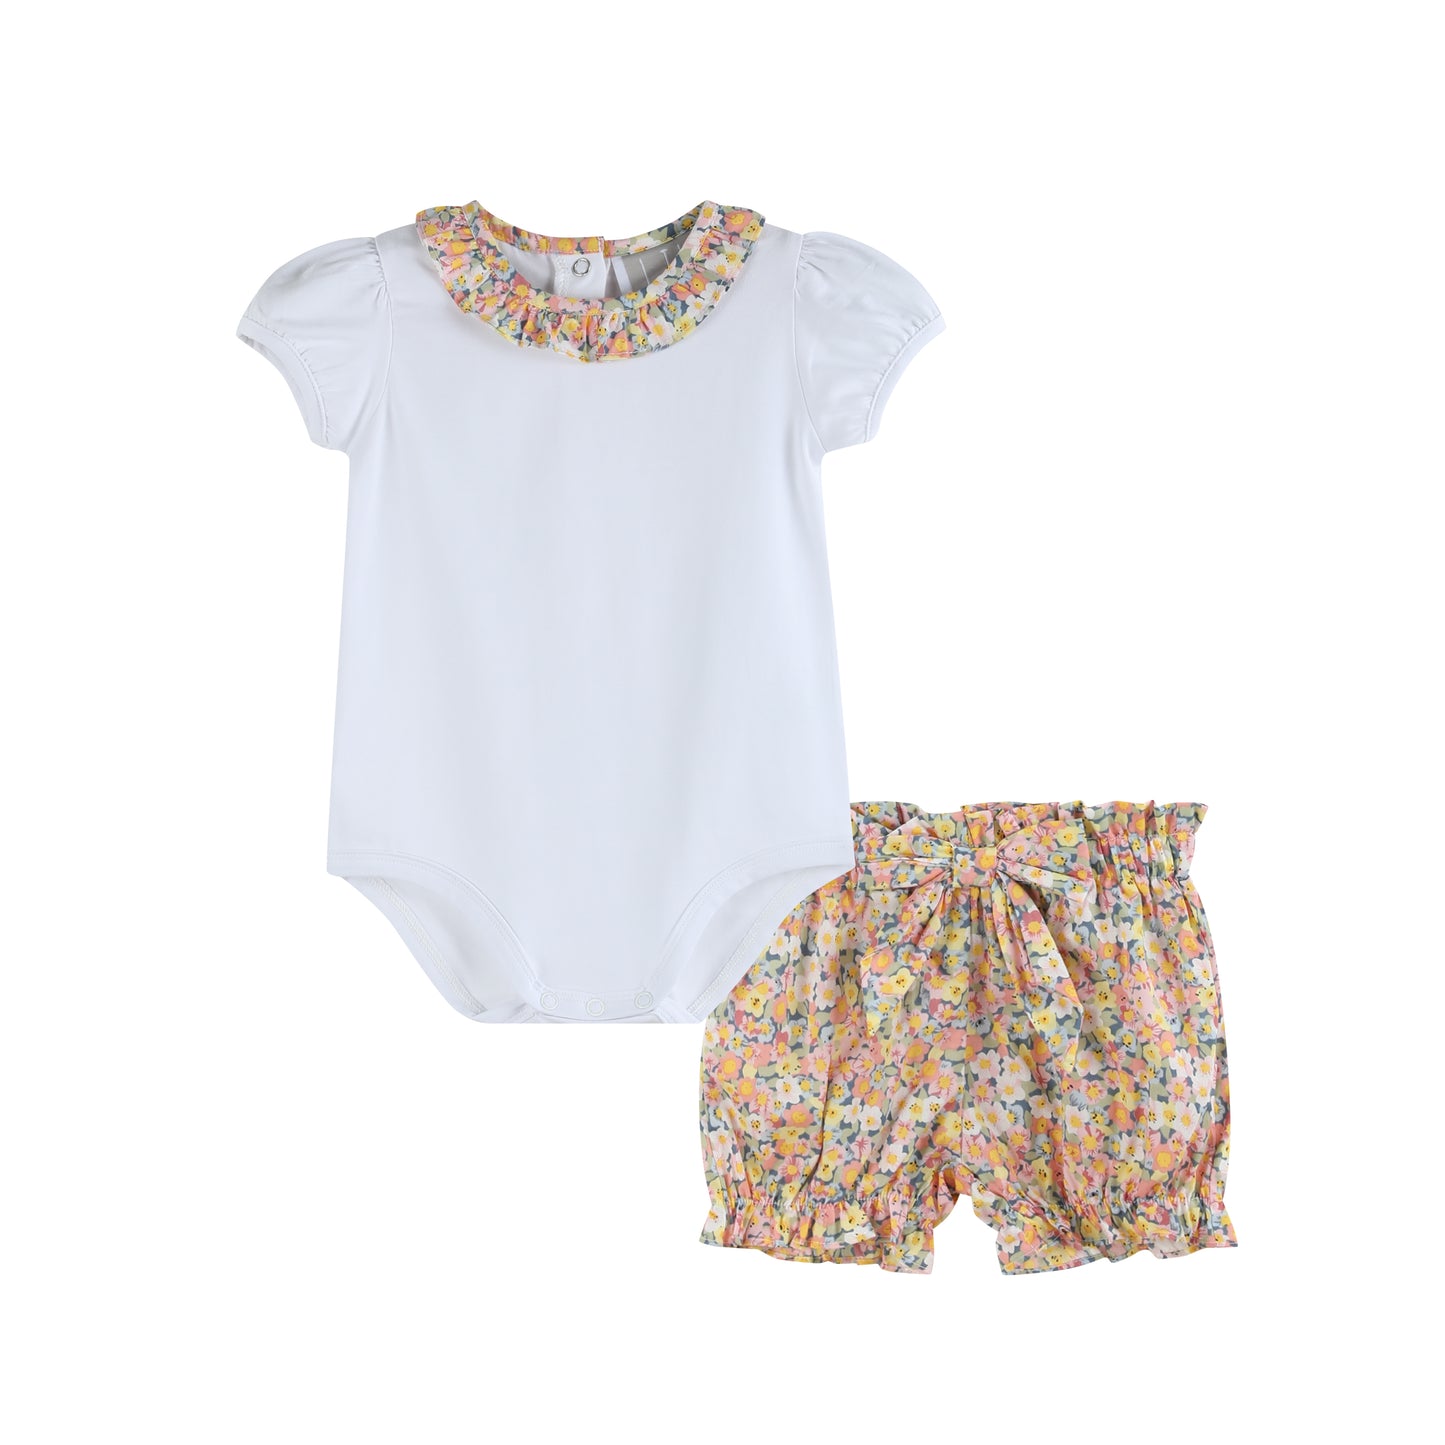 Peach Floral Print Bloomer and Shirt 2pc. Set